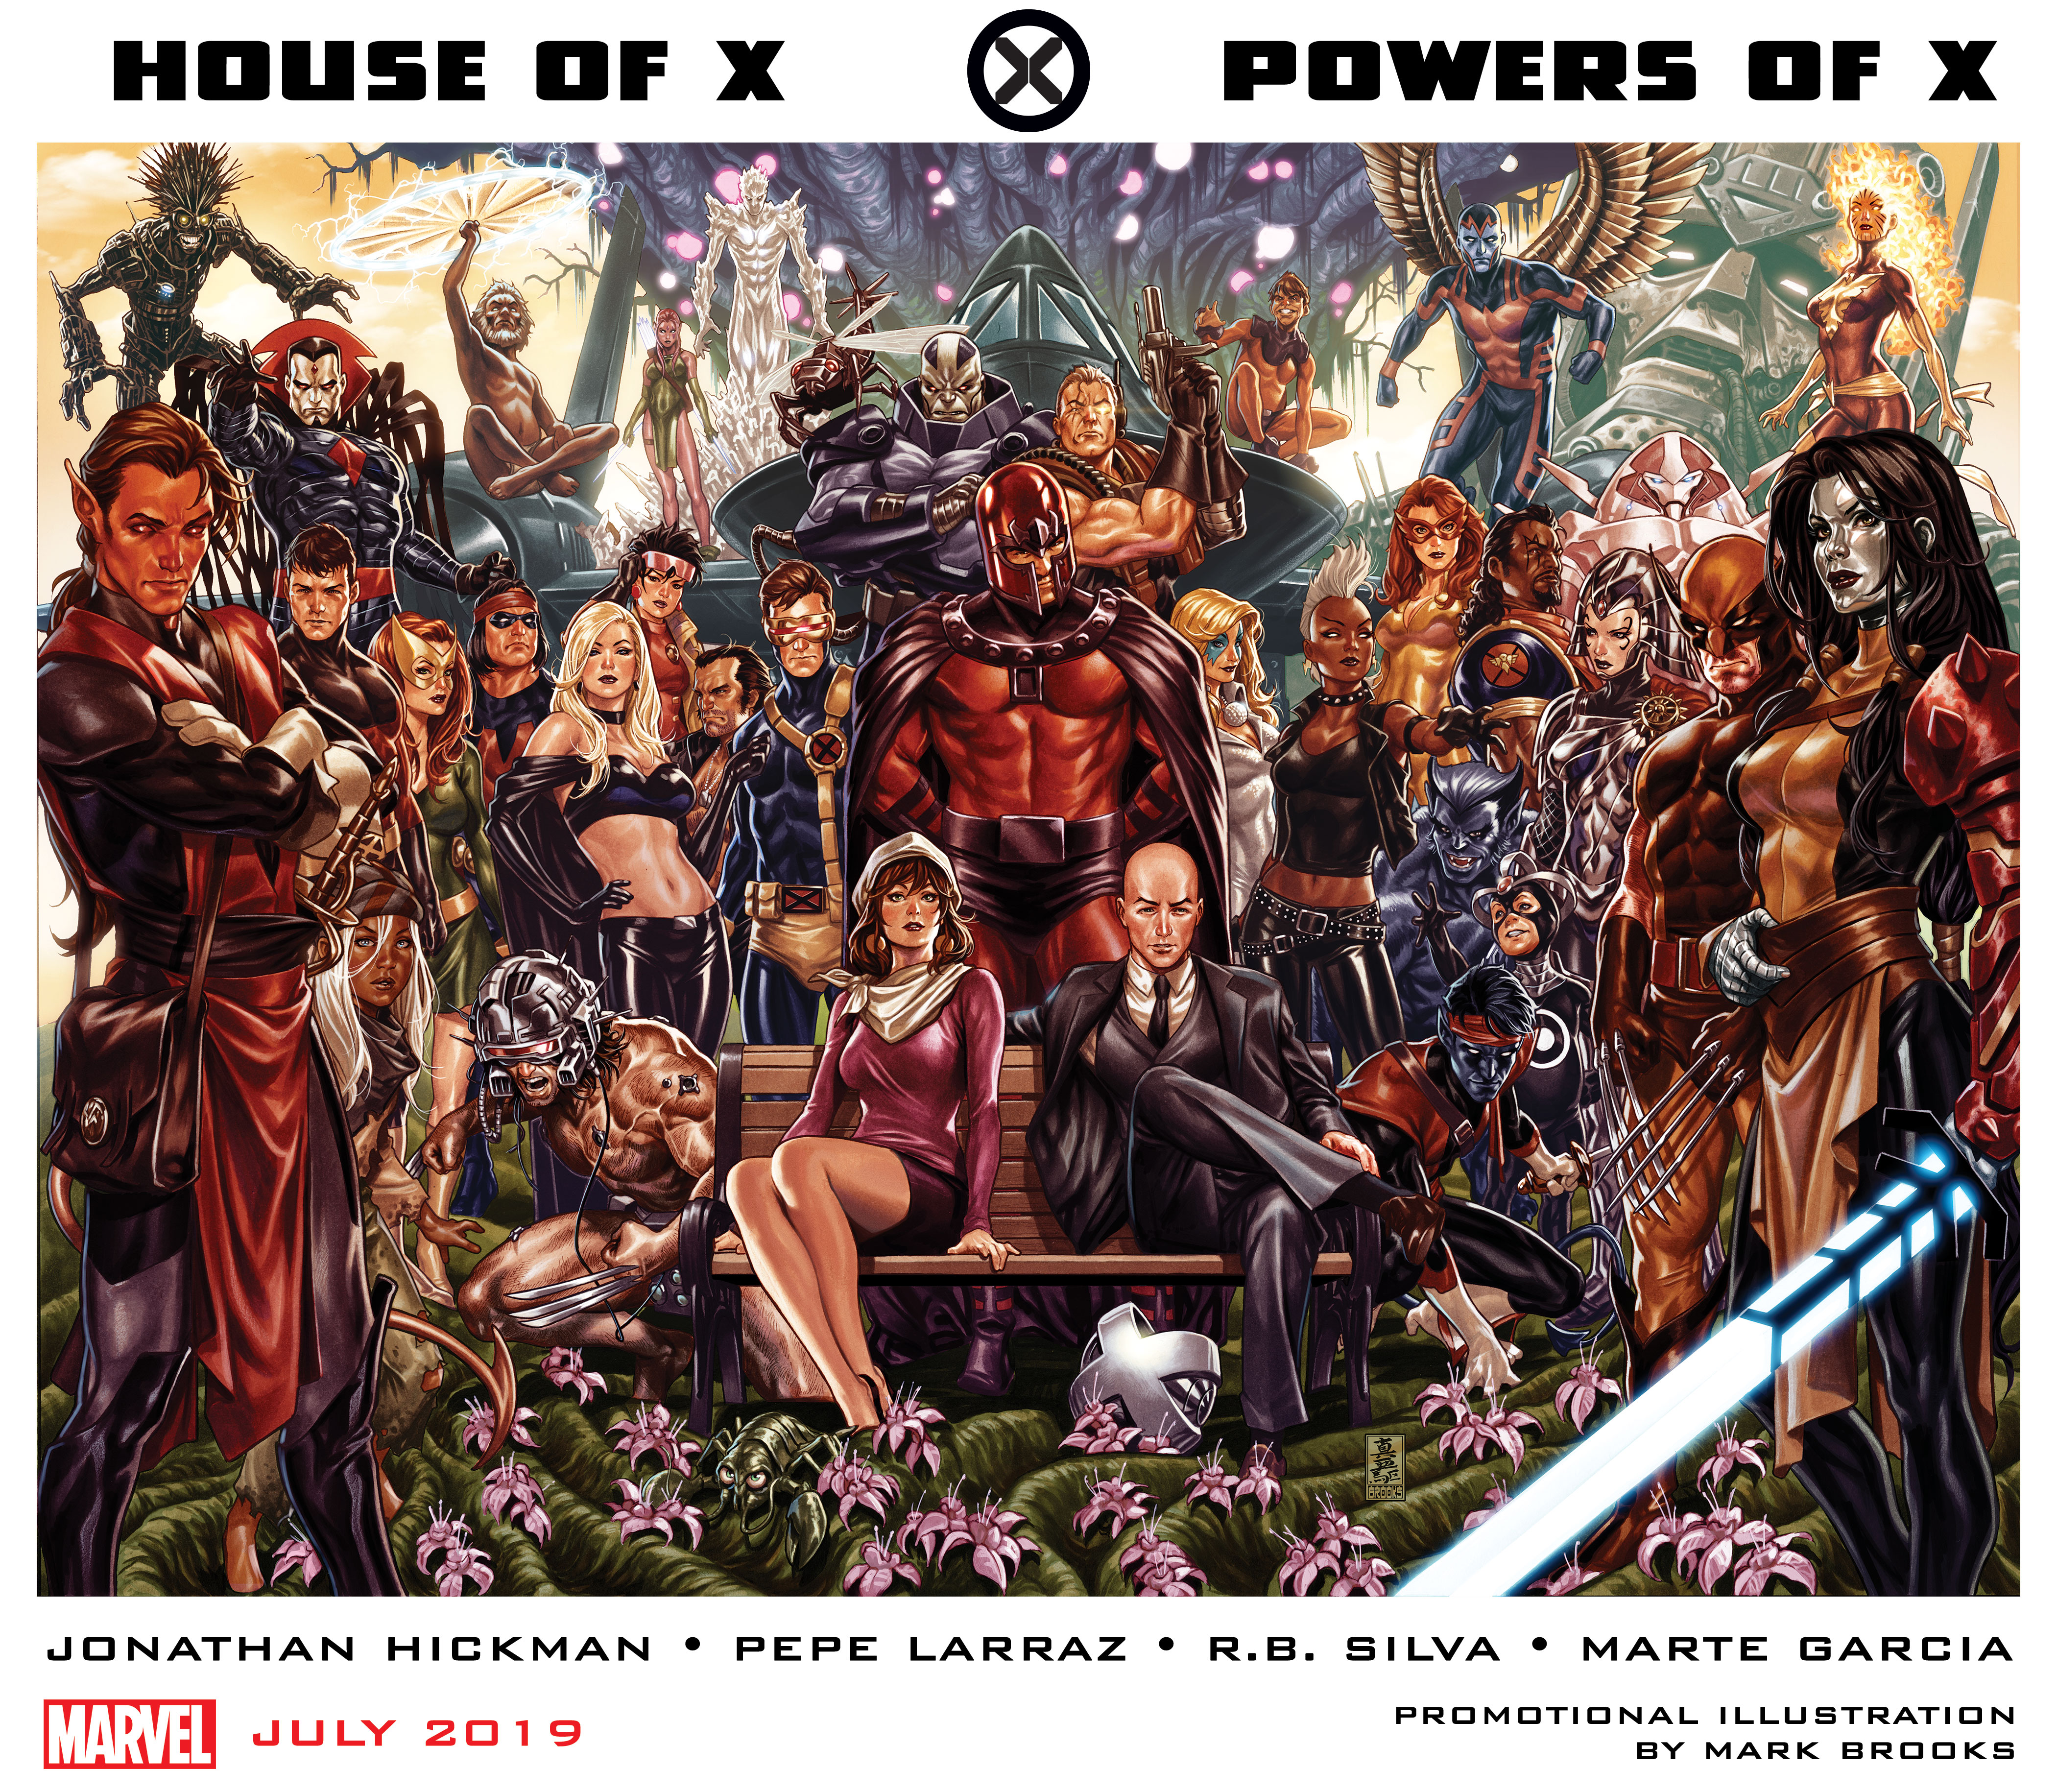 Hickman to write House of X and Powers of X